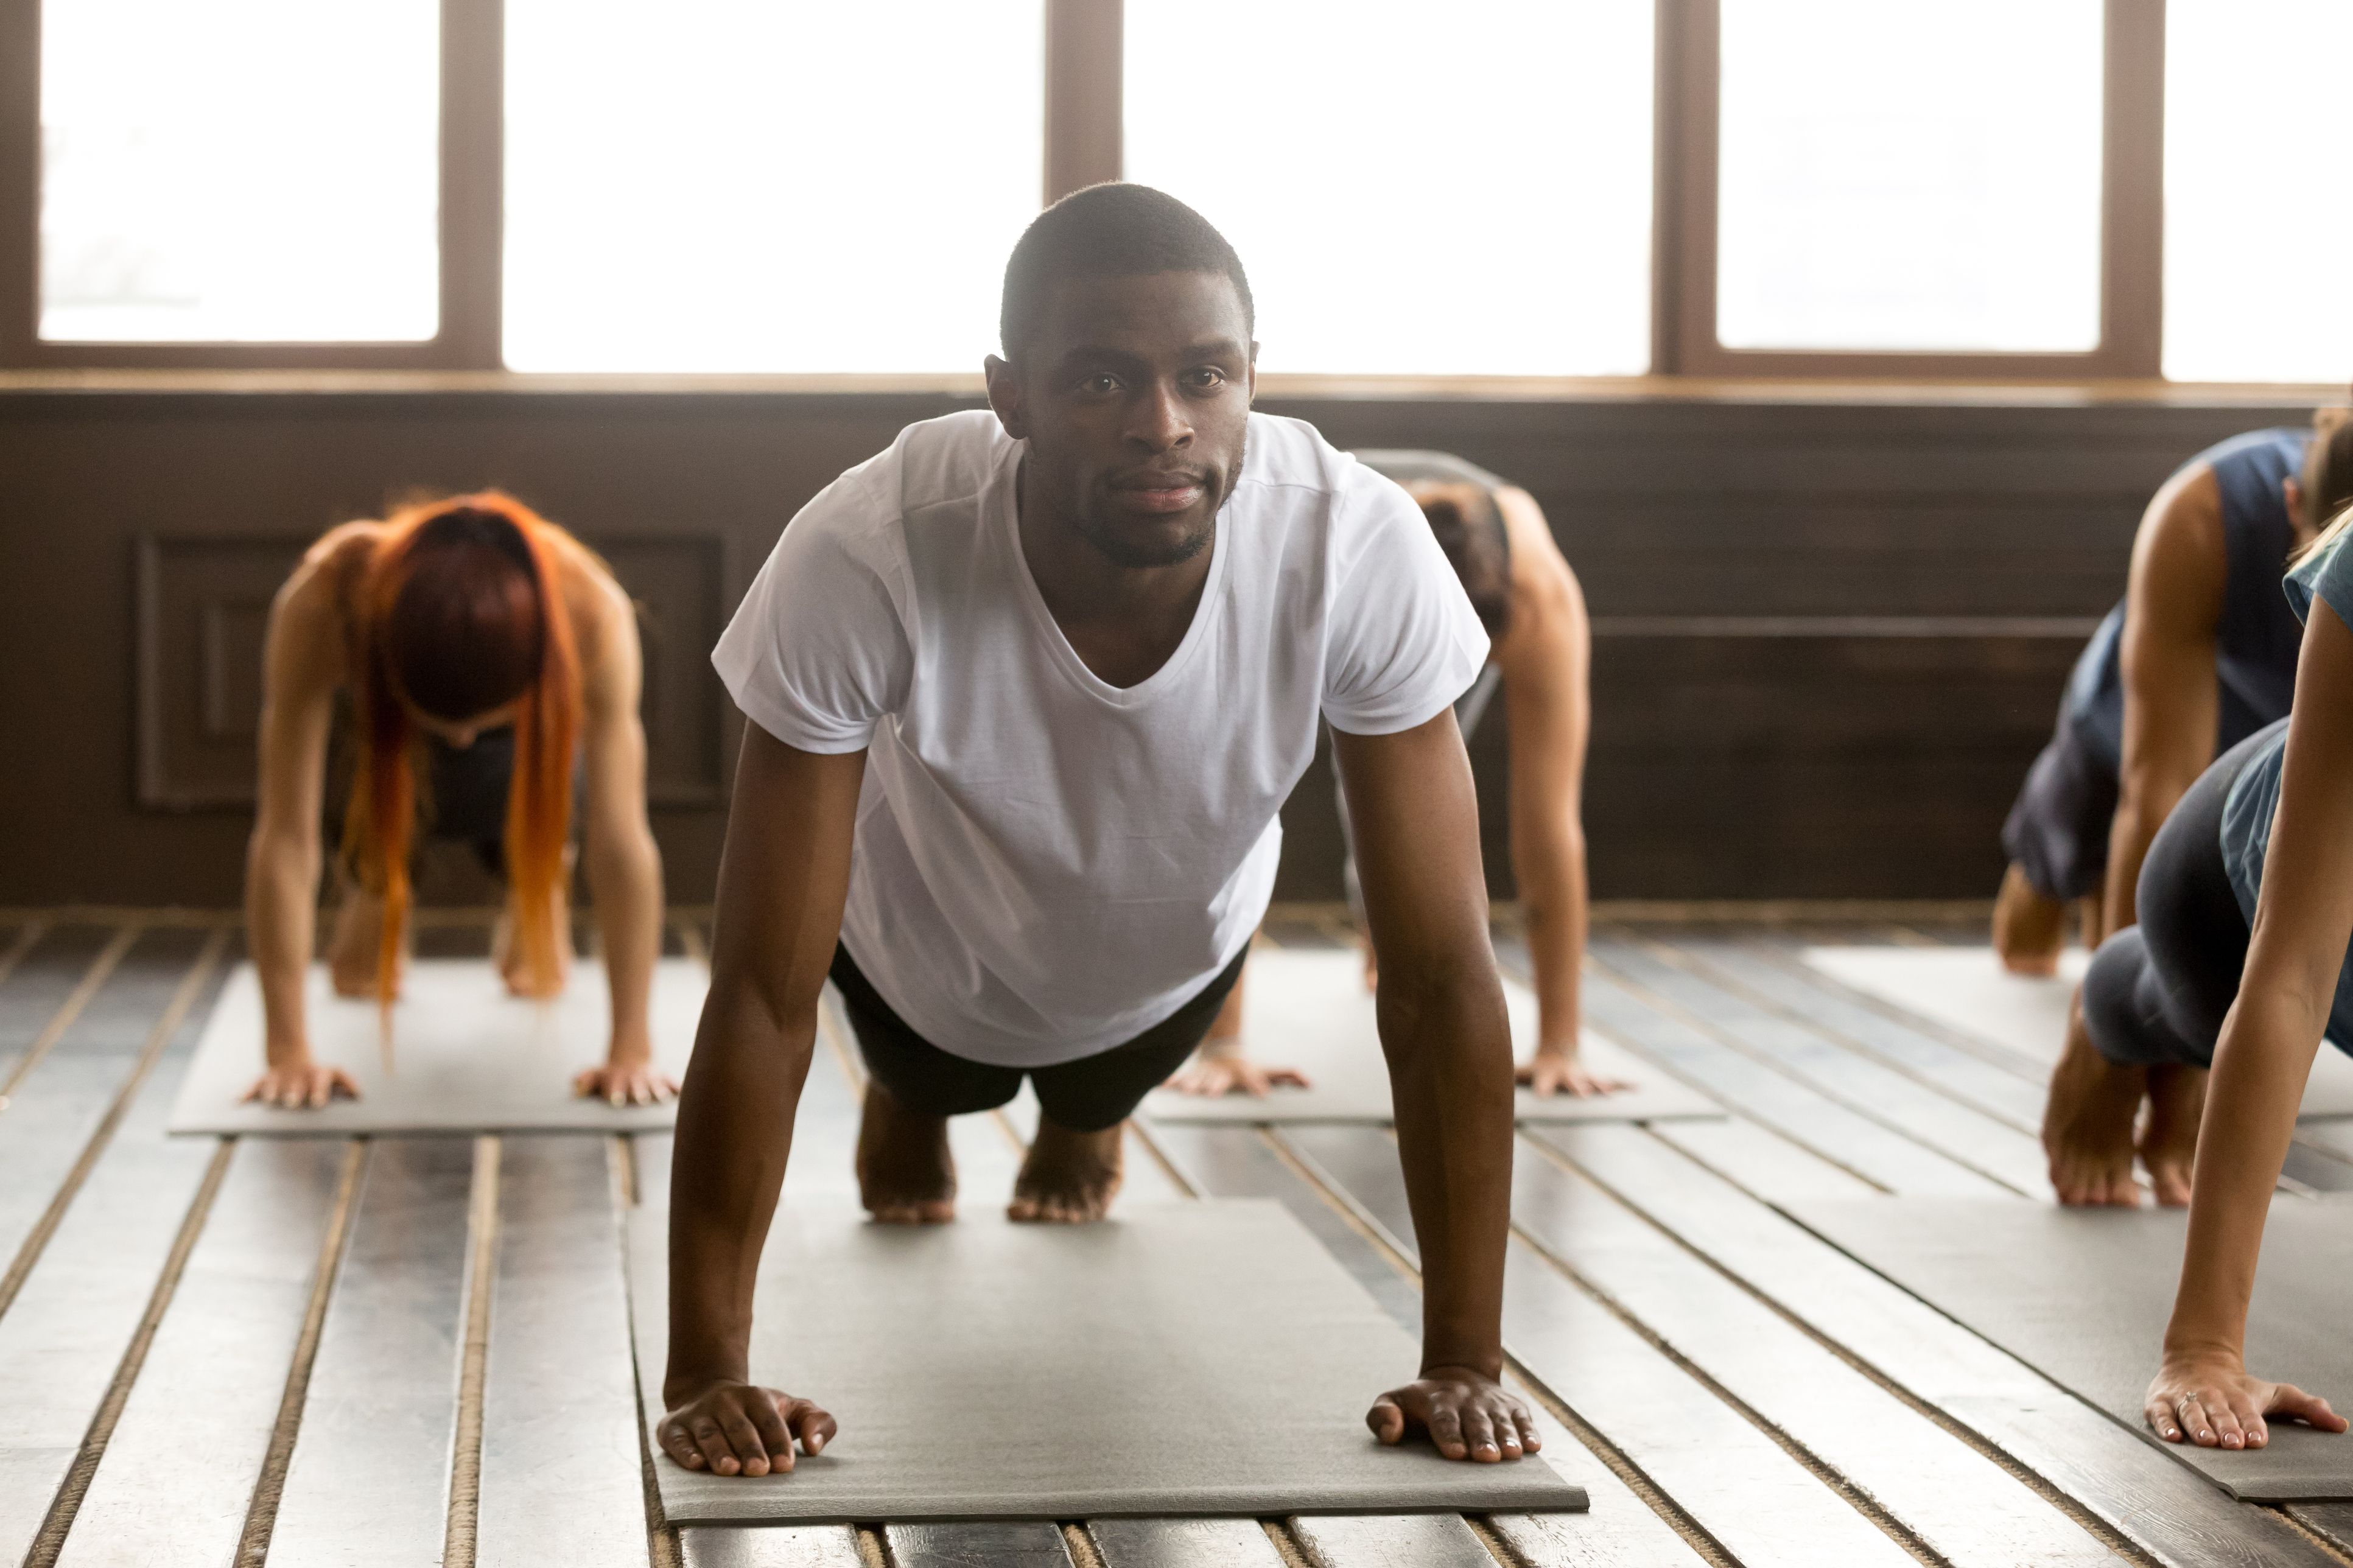 Yoga For Men 10 Yoga Poses For Strength And Flexibility by DeAnne Clifton